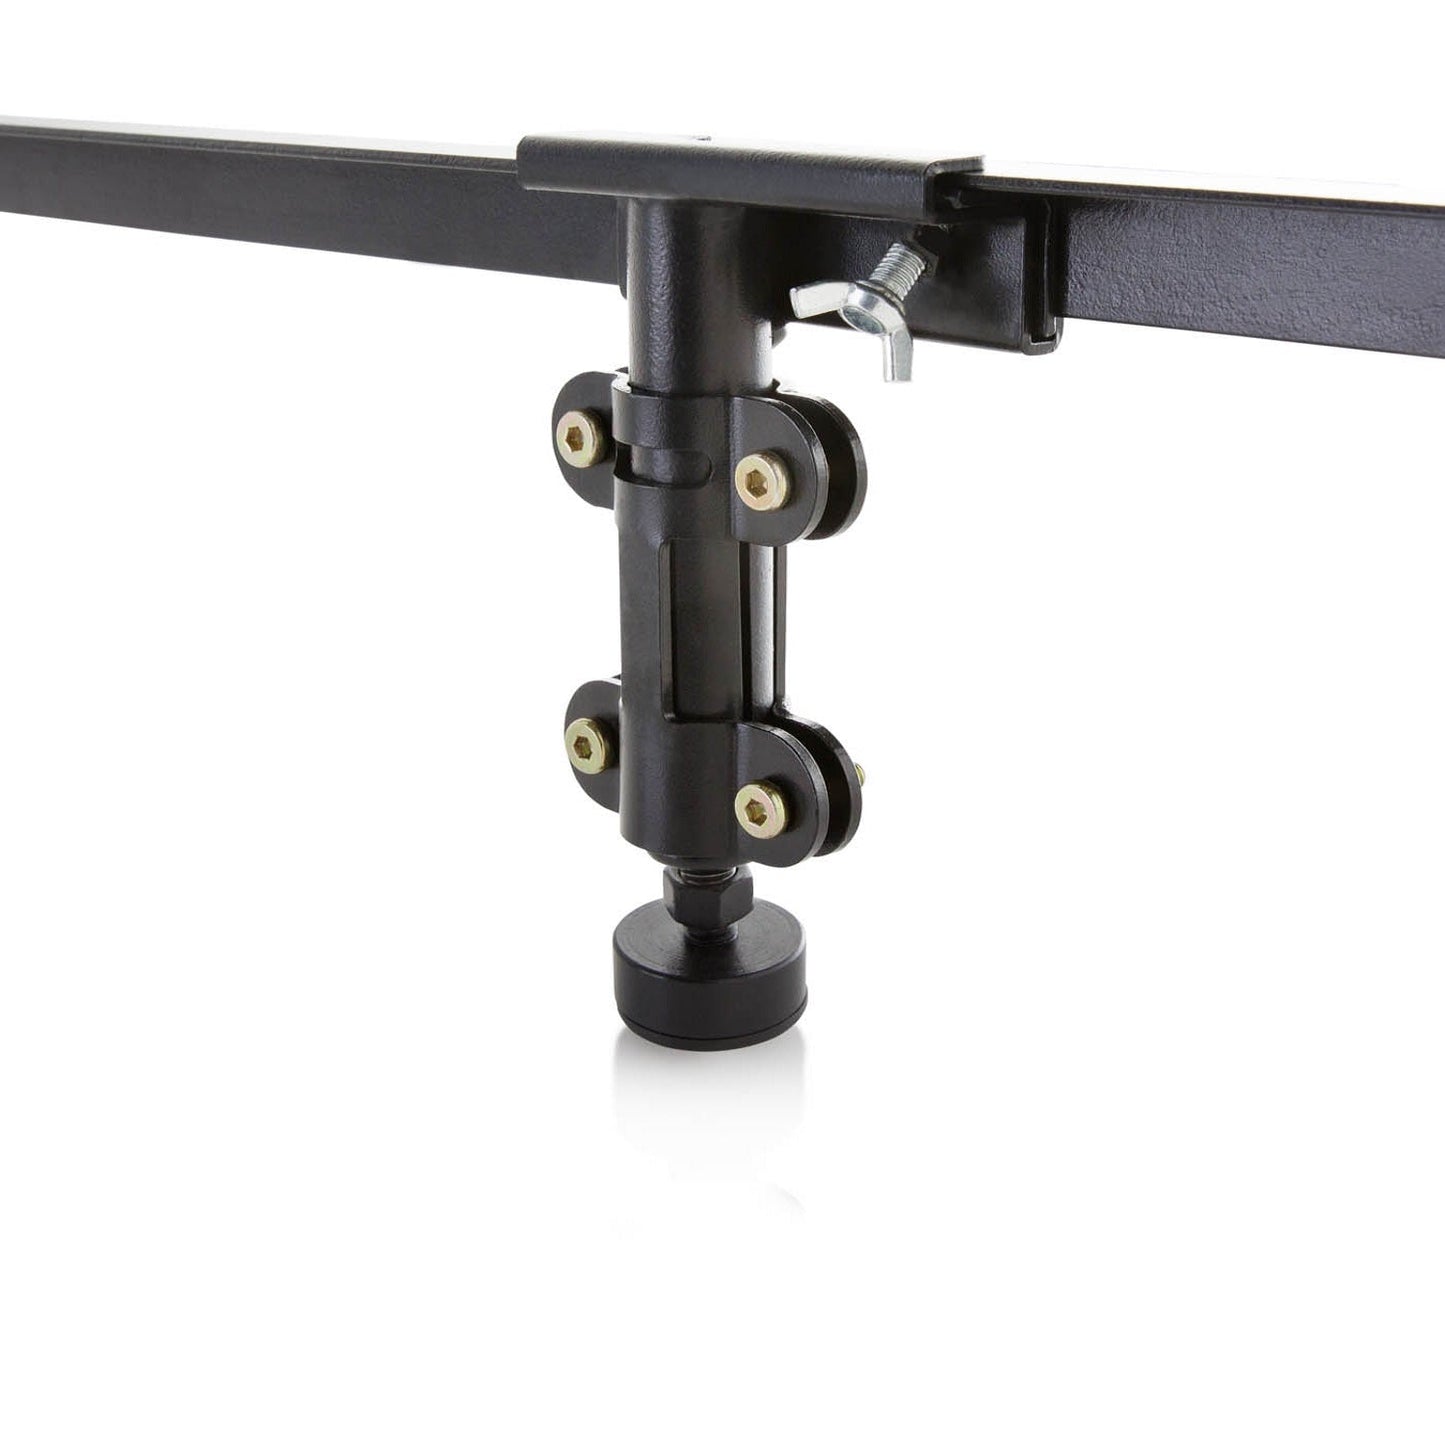 Bolt-on Bed Rail System with Center Bar Support